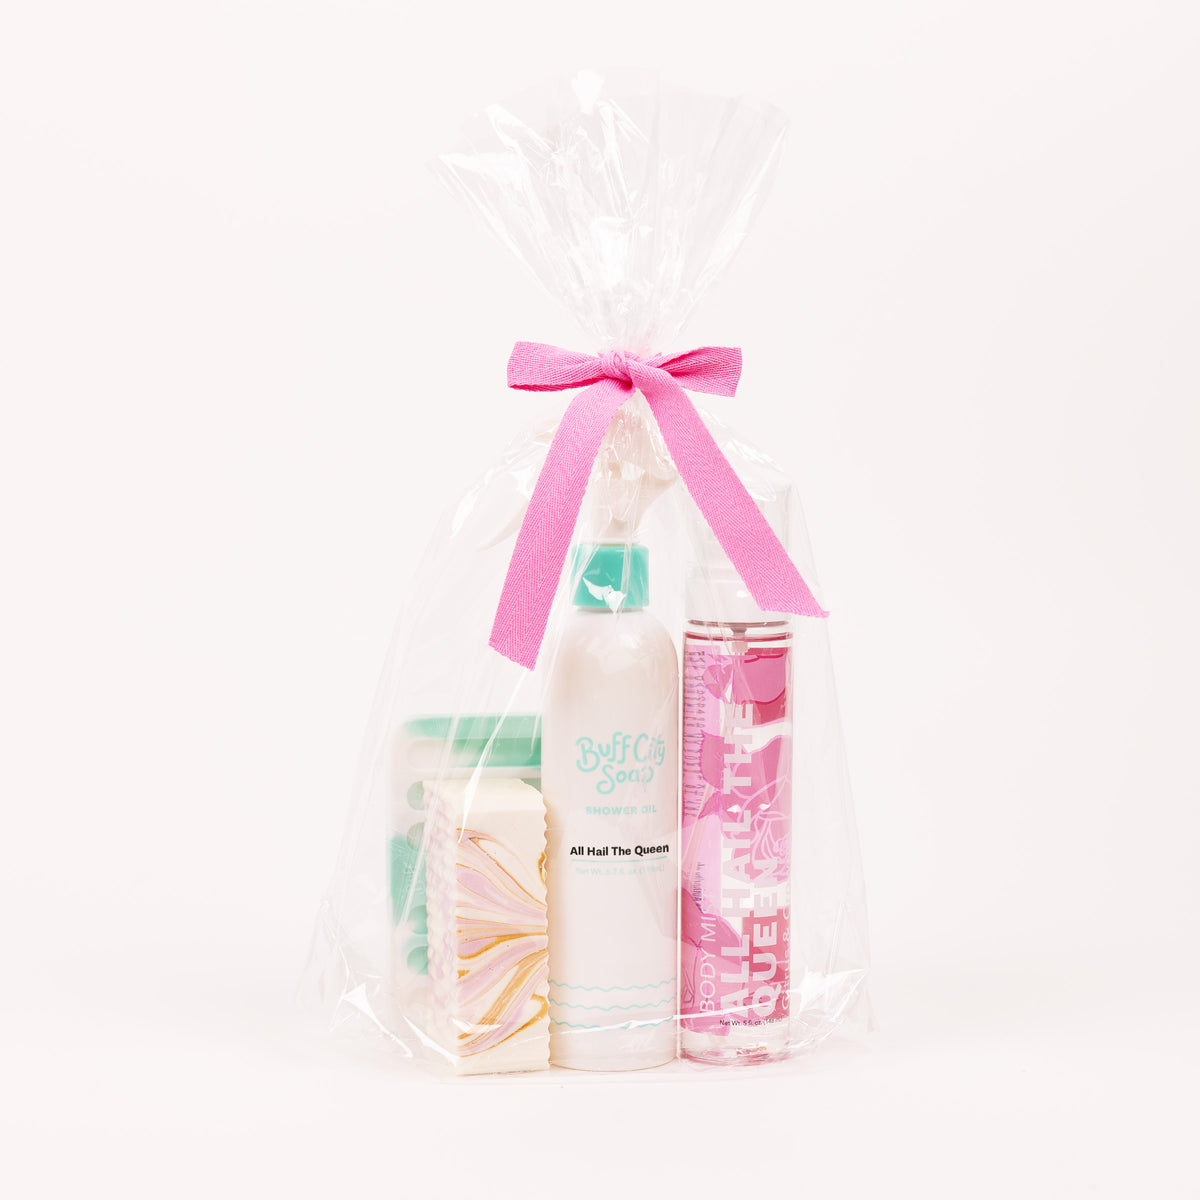 All Hail The Queen Personal Care Mother's Day Gift Set